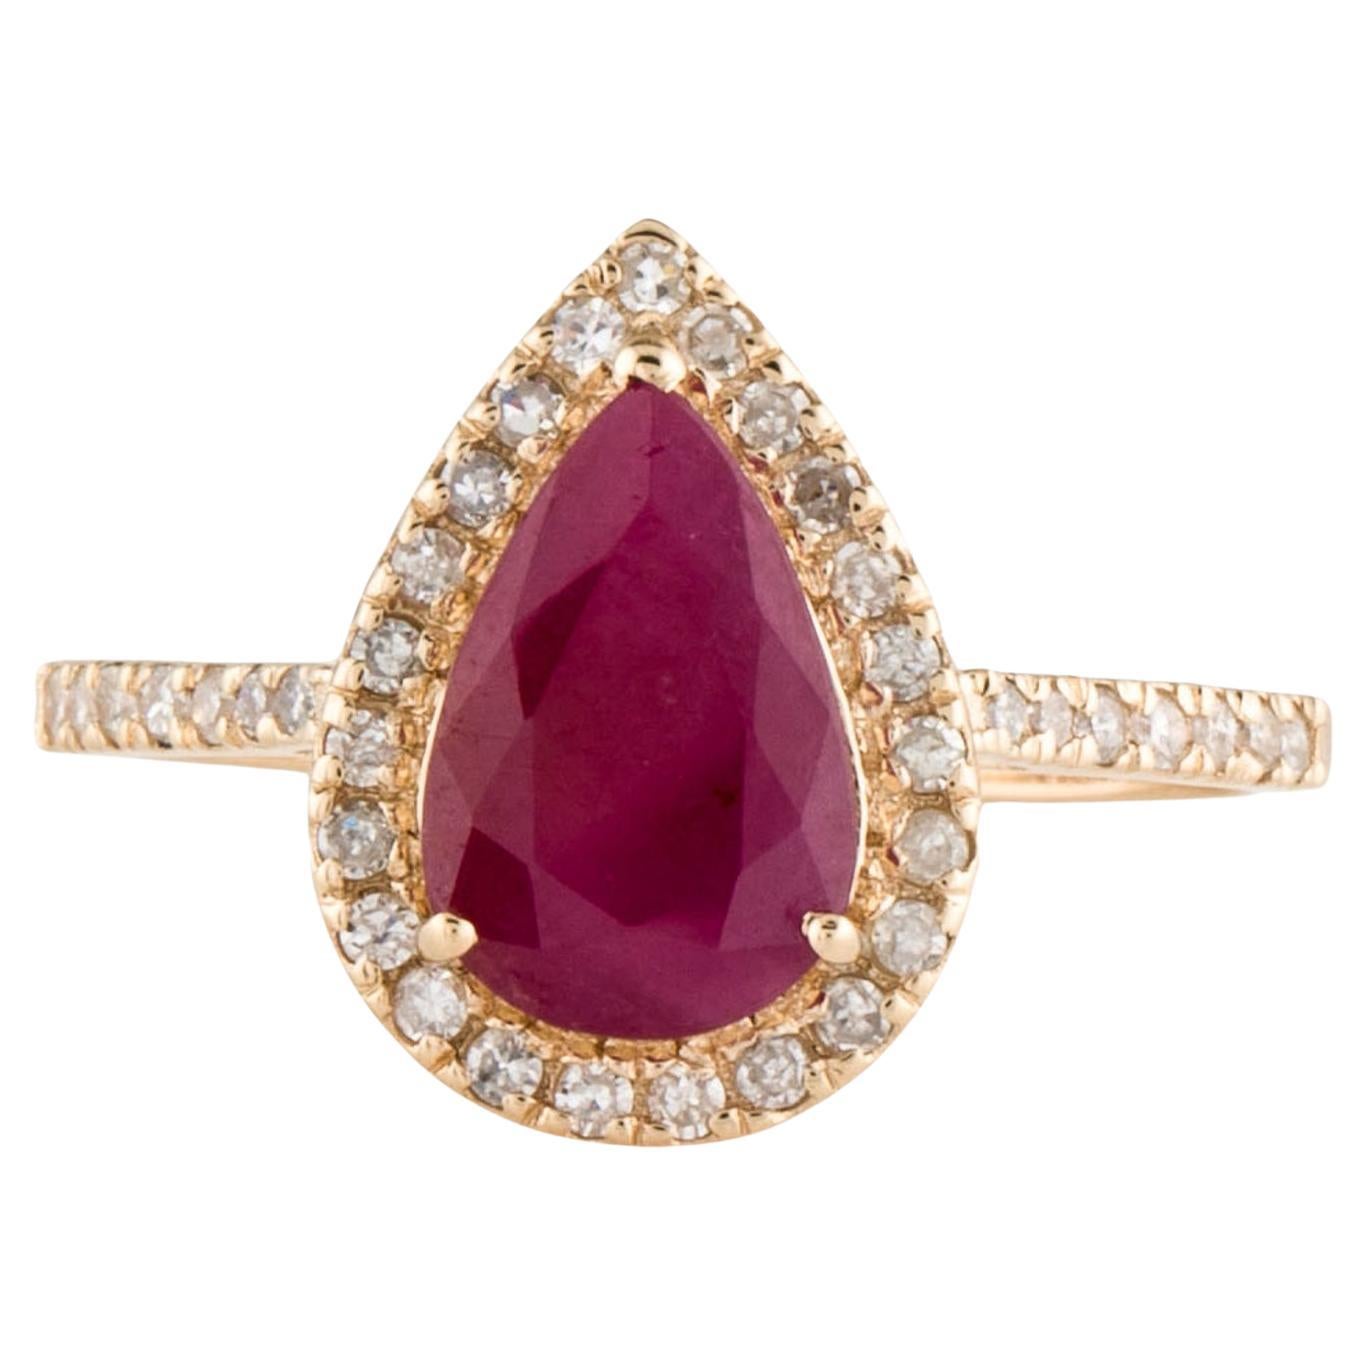 Luxury 14K Ruby & Diamond Cocktail Ring 1.58ctw - Size 6.75 - Timeless & Elegant For Sale